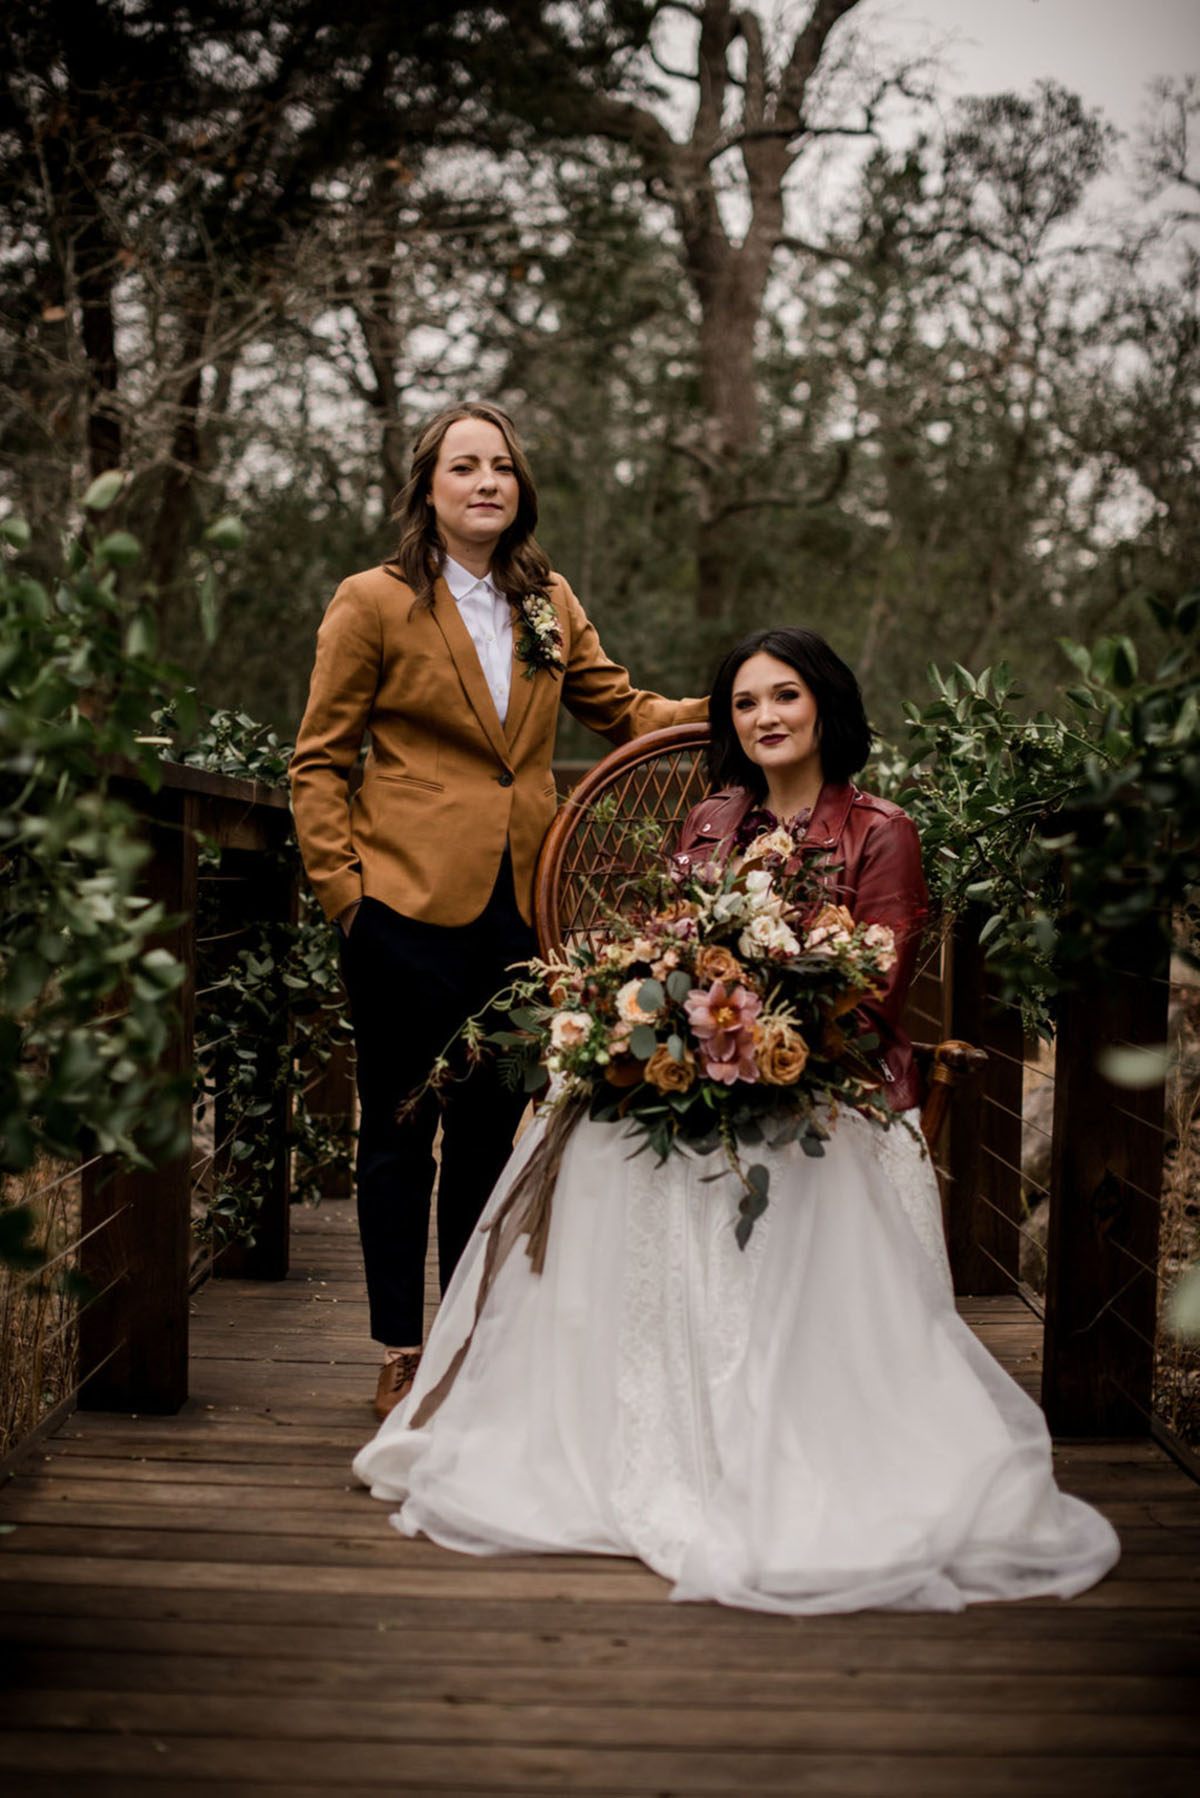 Floral bohemian forest wedding inspiration on a bridge two brides lesbian wedding long white dress tan suit jacket red leather jacket romantic moody